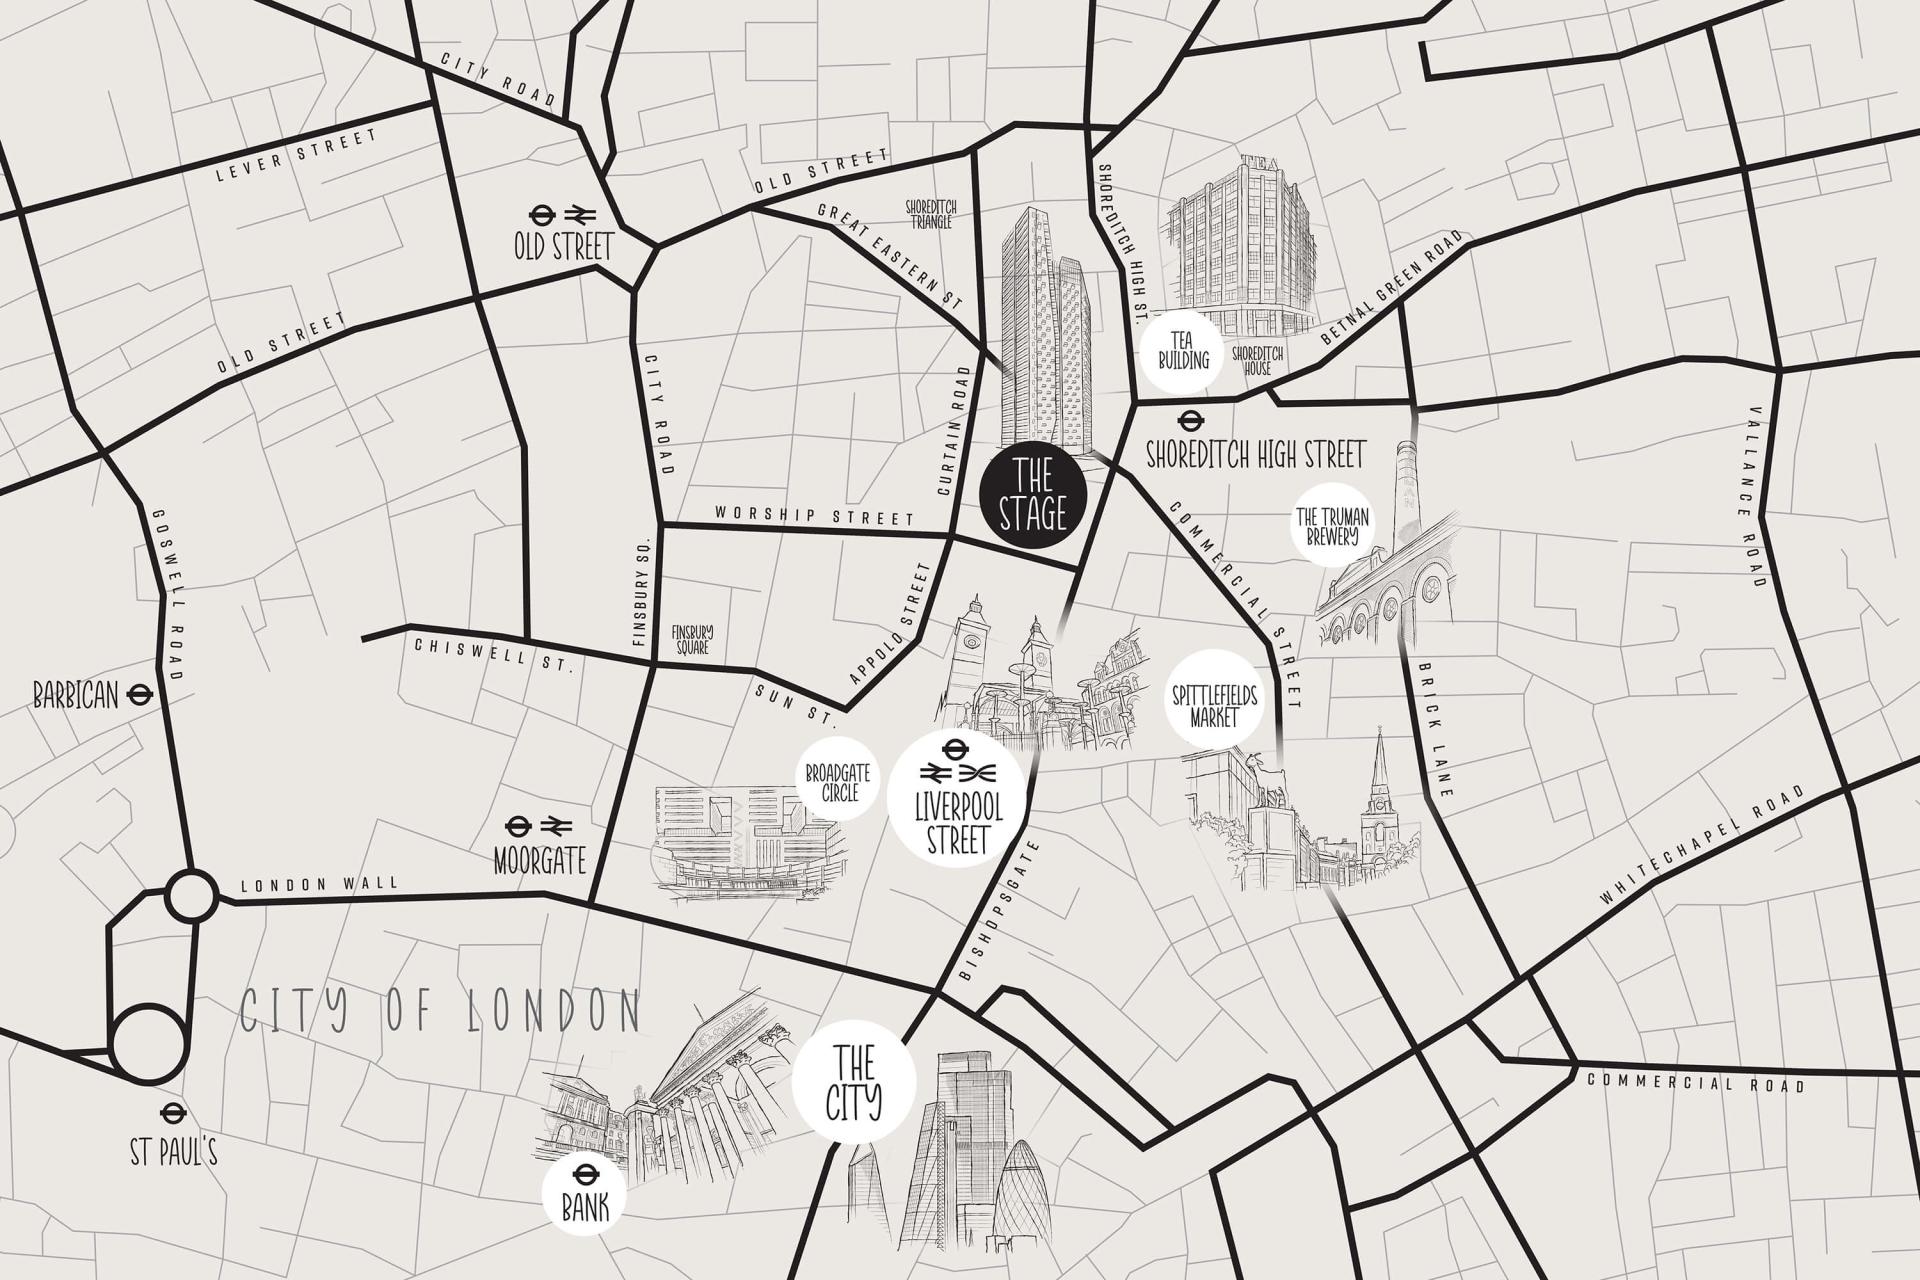 Map of Shoreditch and surrounding areas